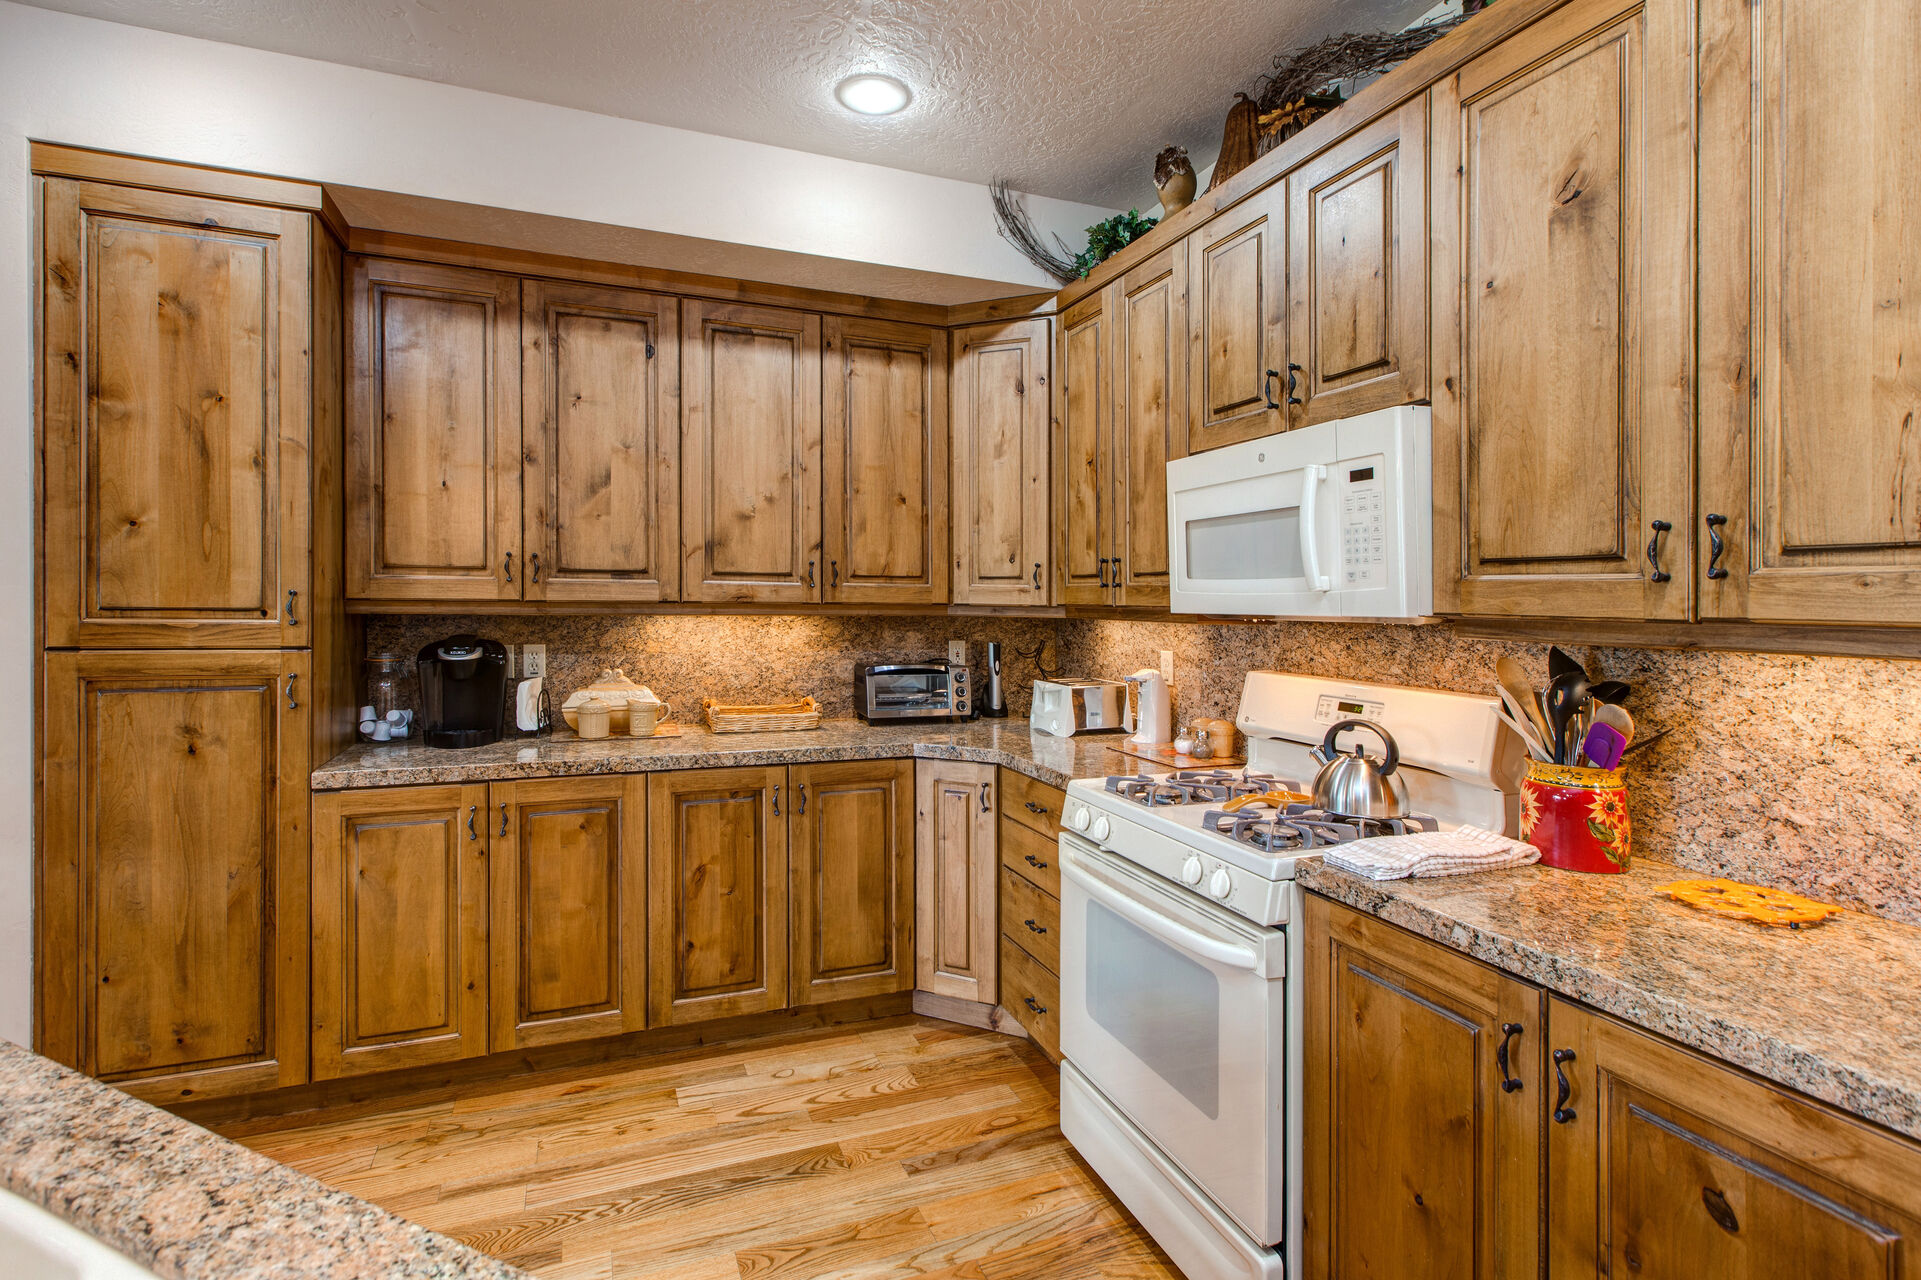 Fully Equipped Kitchen with Gas Range, Lovely Cabinets and Granite Countertops